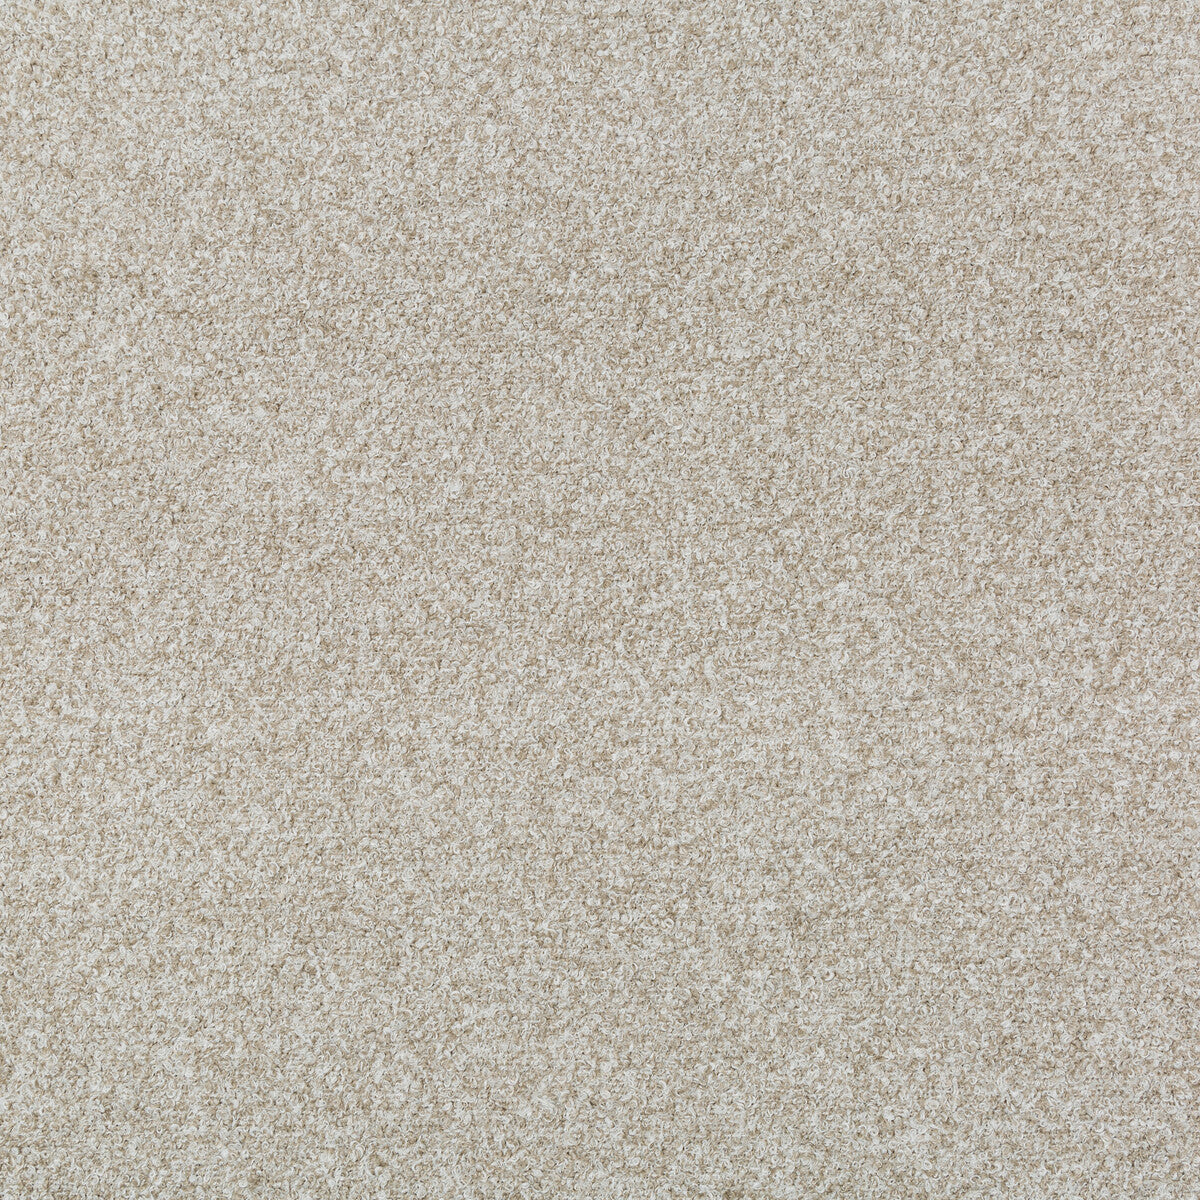 Vista Boucle fabric in sand color - pattern 35499.16.0 - by Kravet Couture in the Vista collection